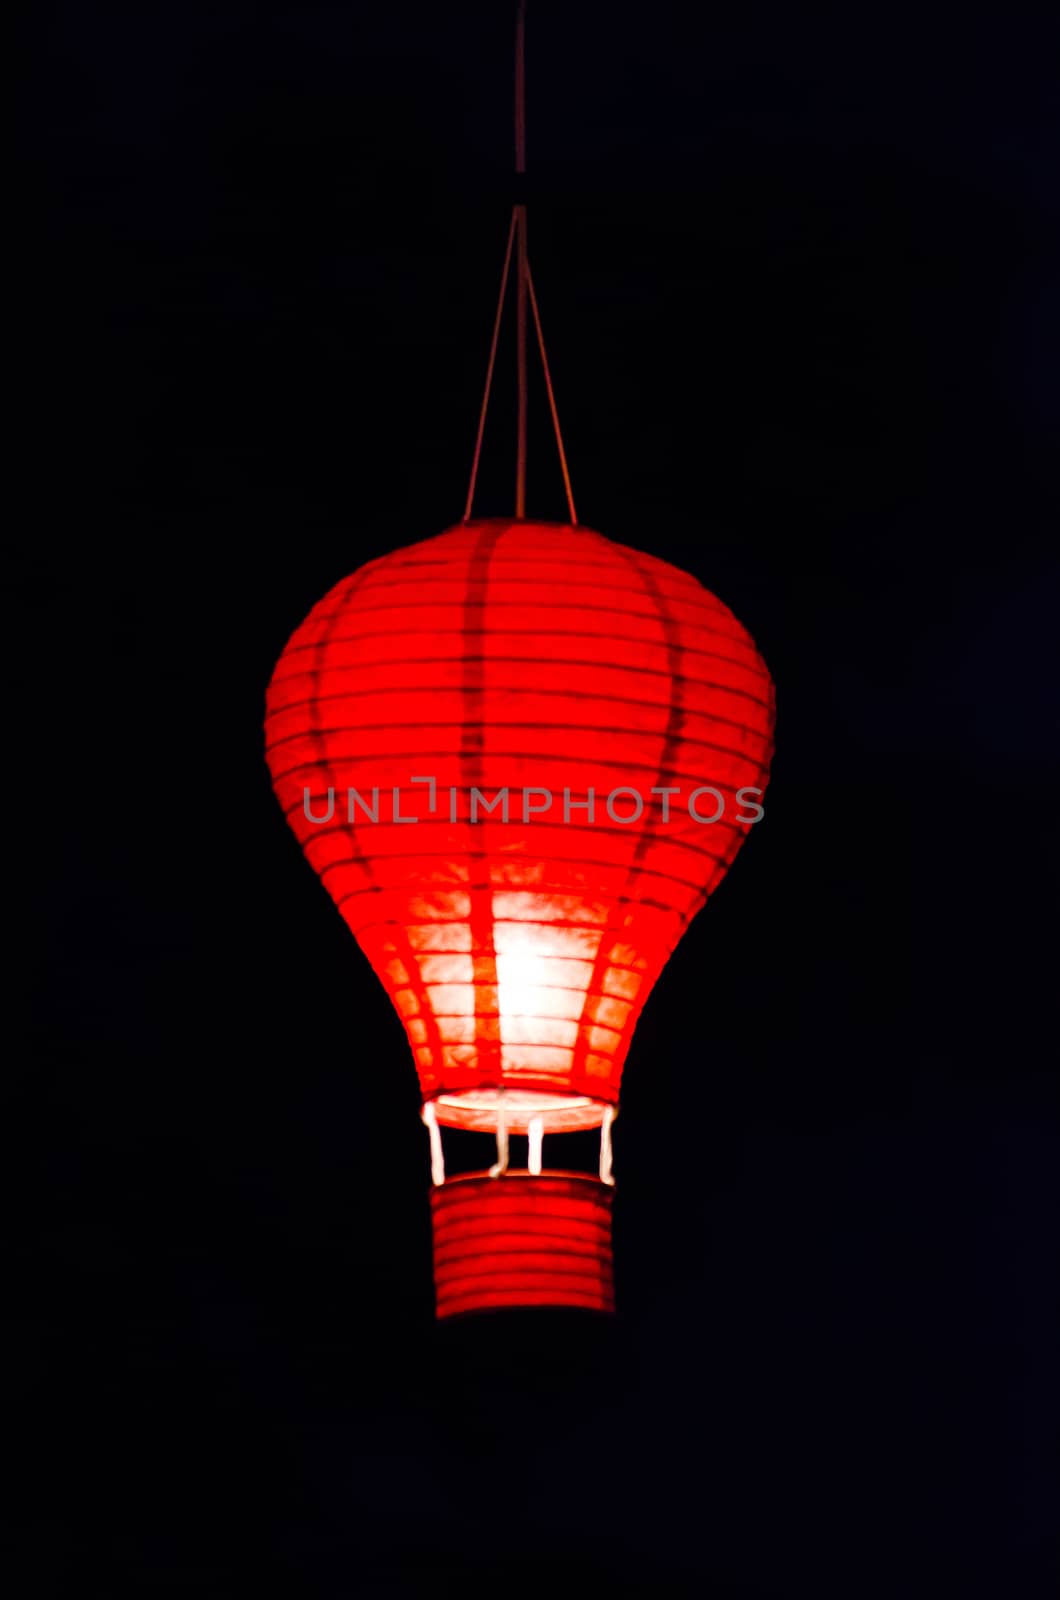 CHIANG MAI - DECEMBER 7: Mini balloon, decorated with colorful lights on display at The Thailand International Balloon Festival 2013 on December 7, 2013 in Chiang Mai, Thailand.